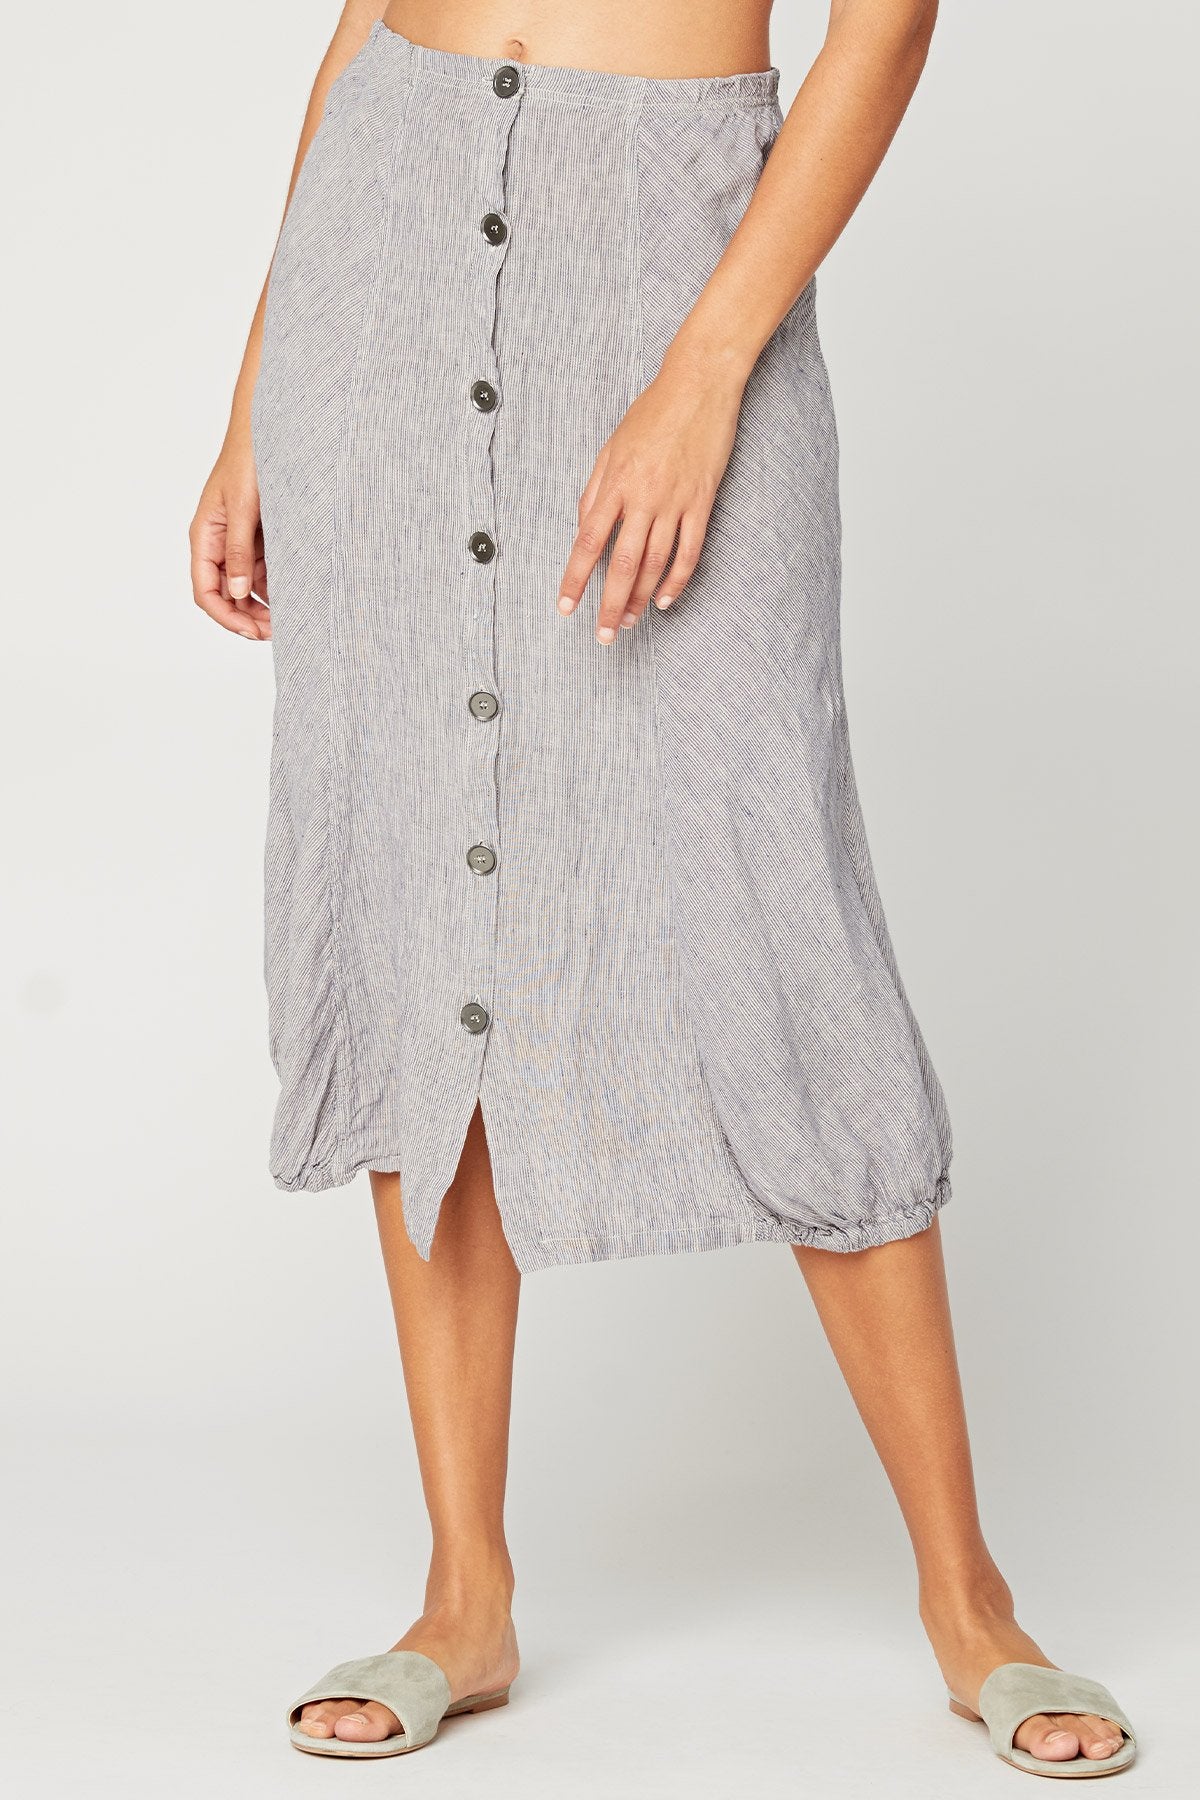 Xcvi Exposed Buttons Skirt In Gray